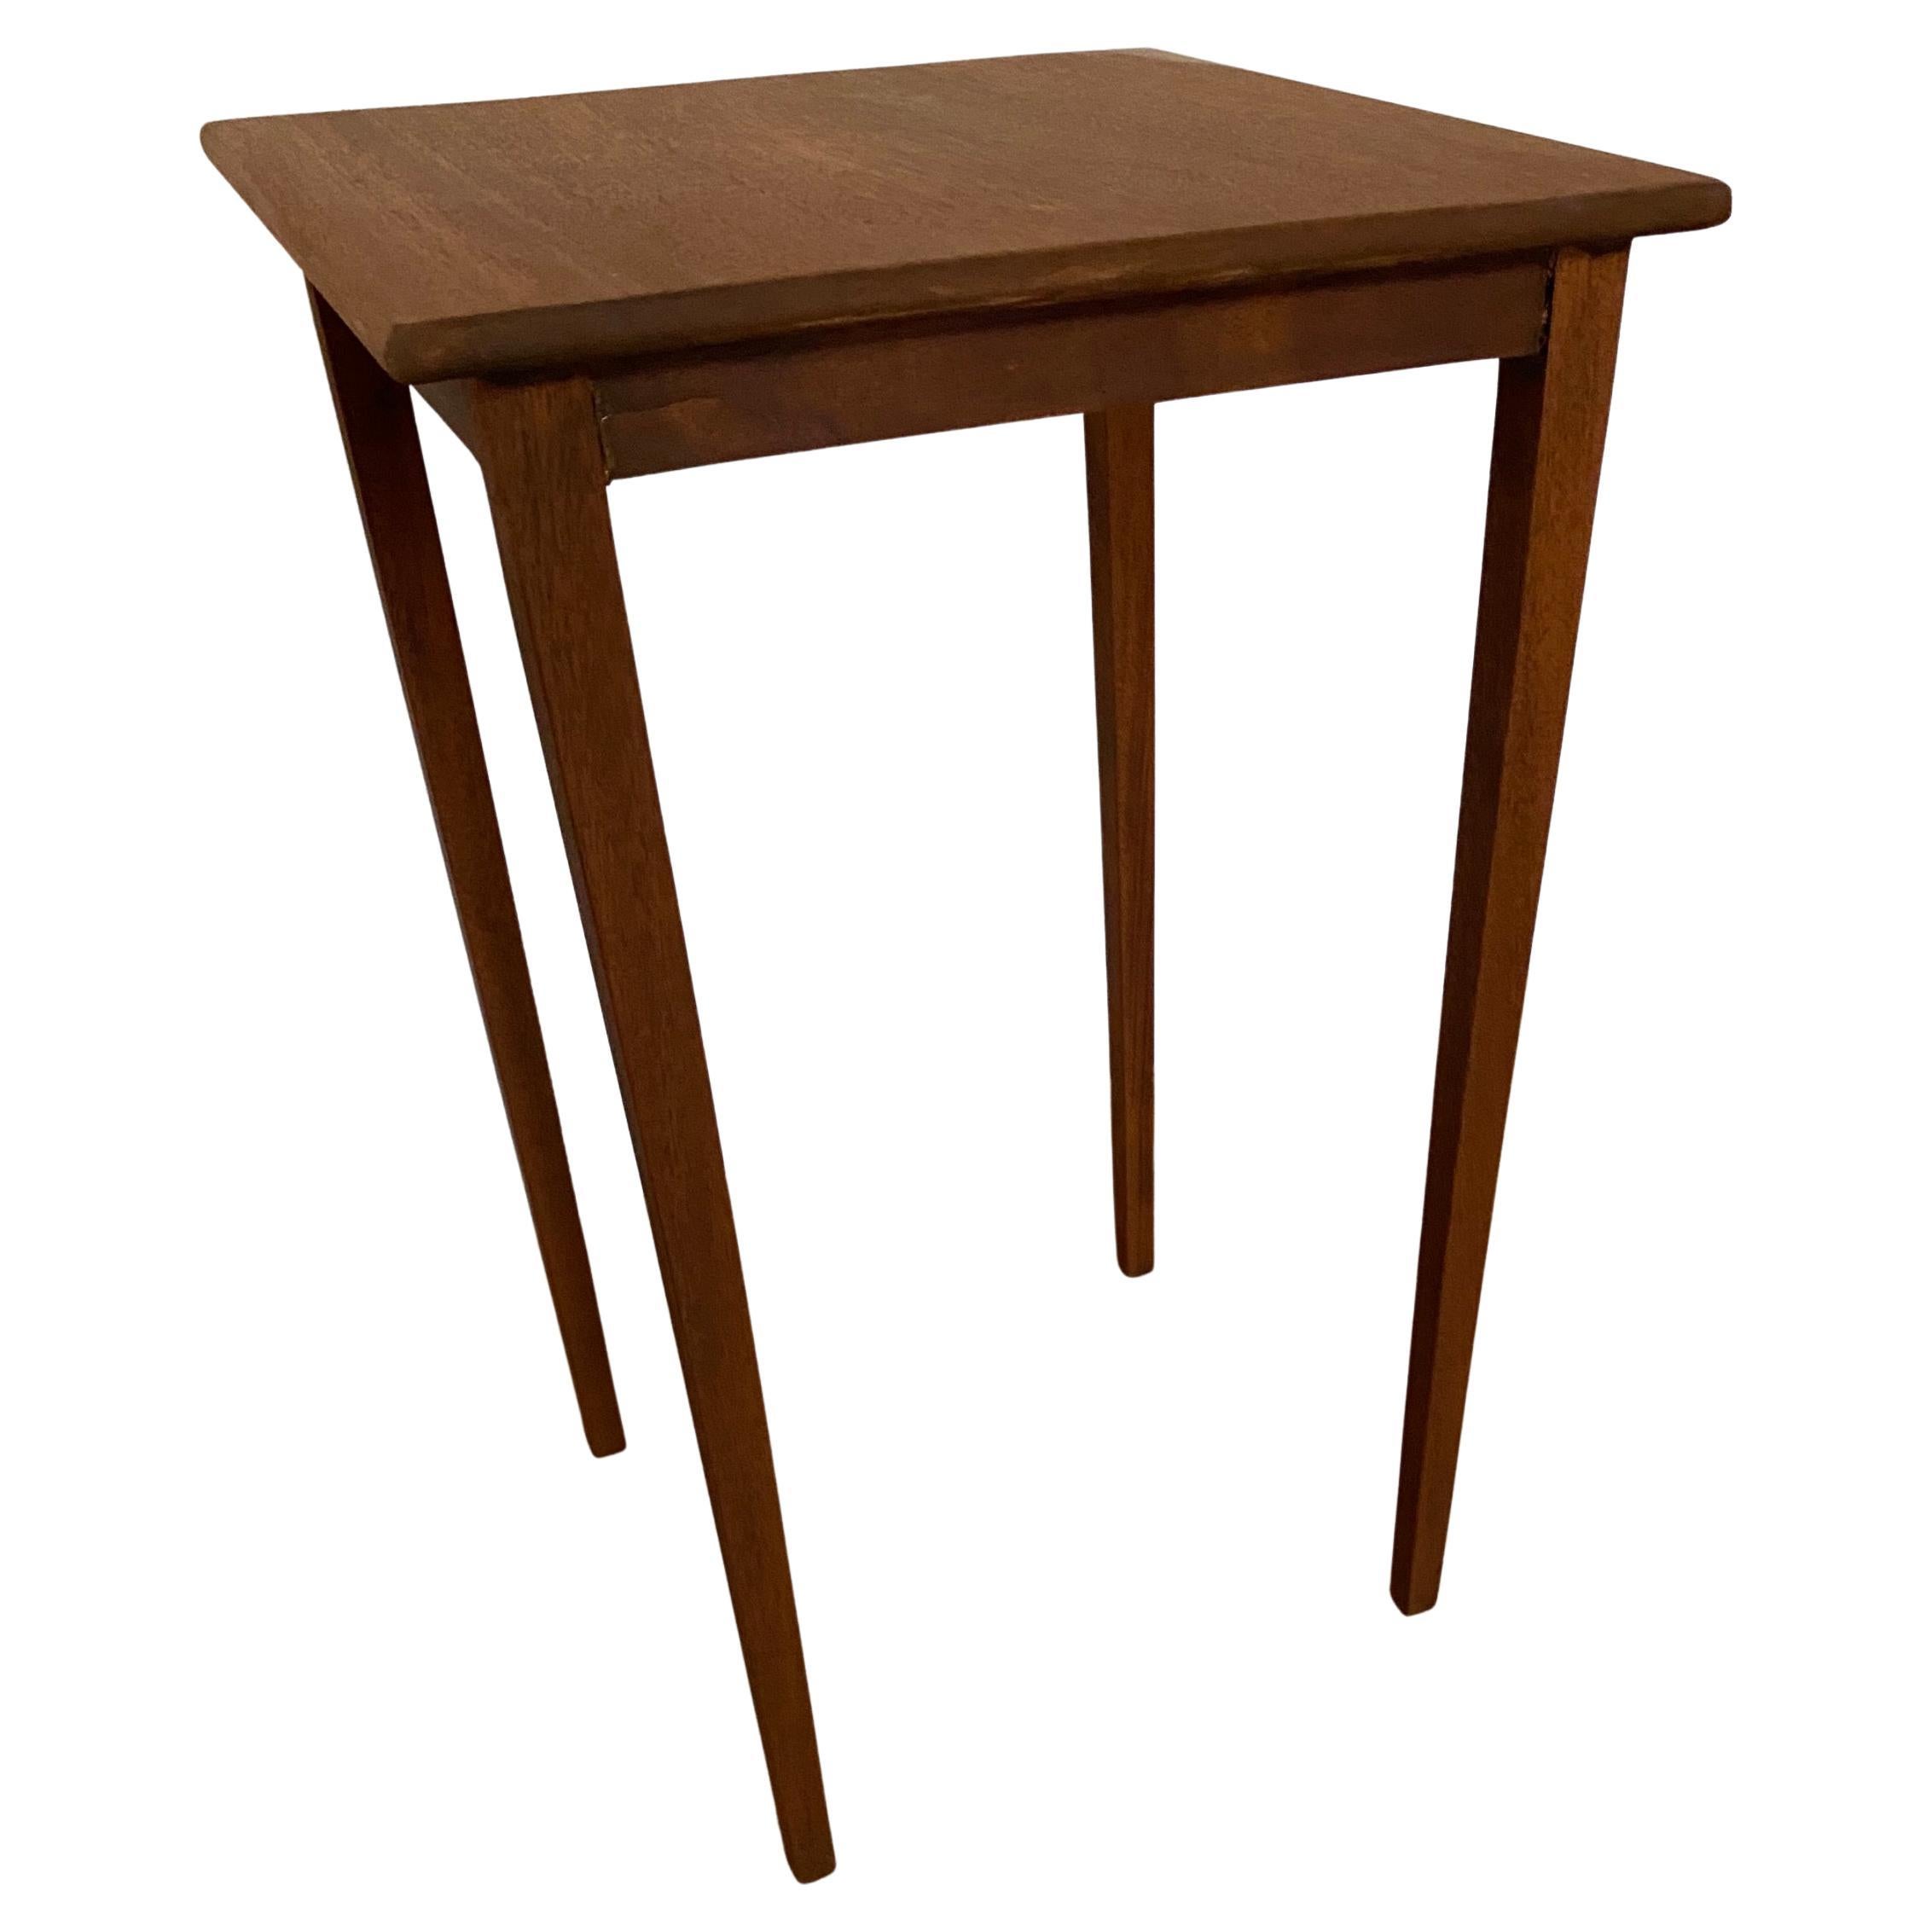 A pair of similar but not identical stands have simple yet elegant contemporary and functional design with tapered legs and a square table top.
Side tables, end tables, night stands.
 